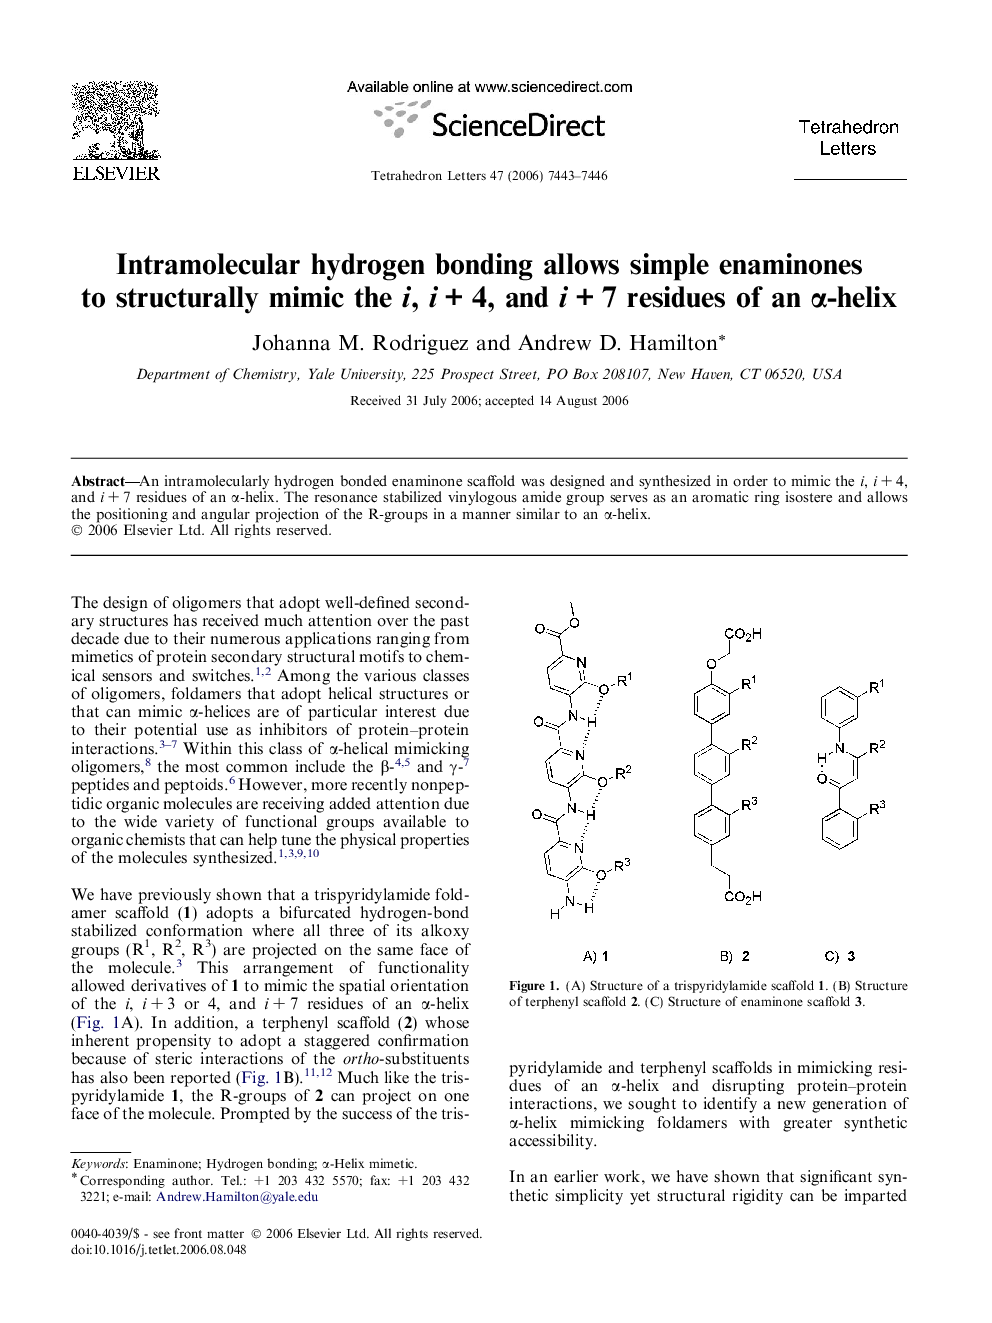 Intramolecular hydrogen bonding allows simple enaminones to structurally mimic the i, iÂ +Â 4, and iÂ +Â 7 residues of an Î±-helix